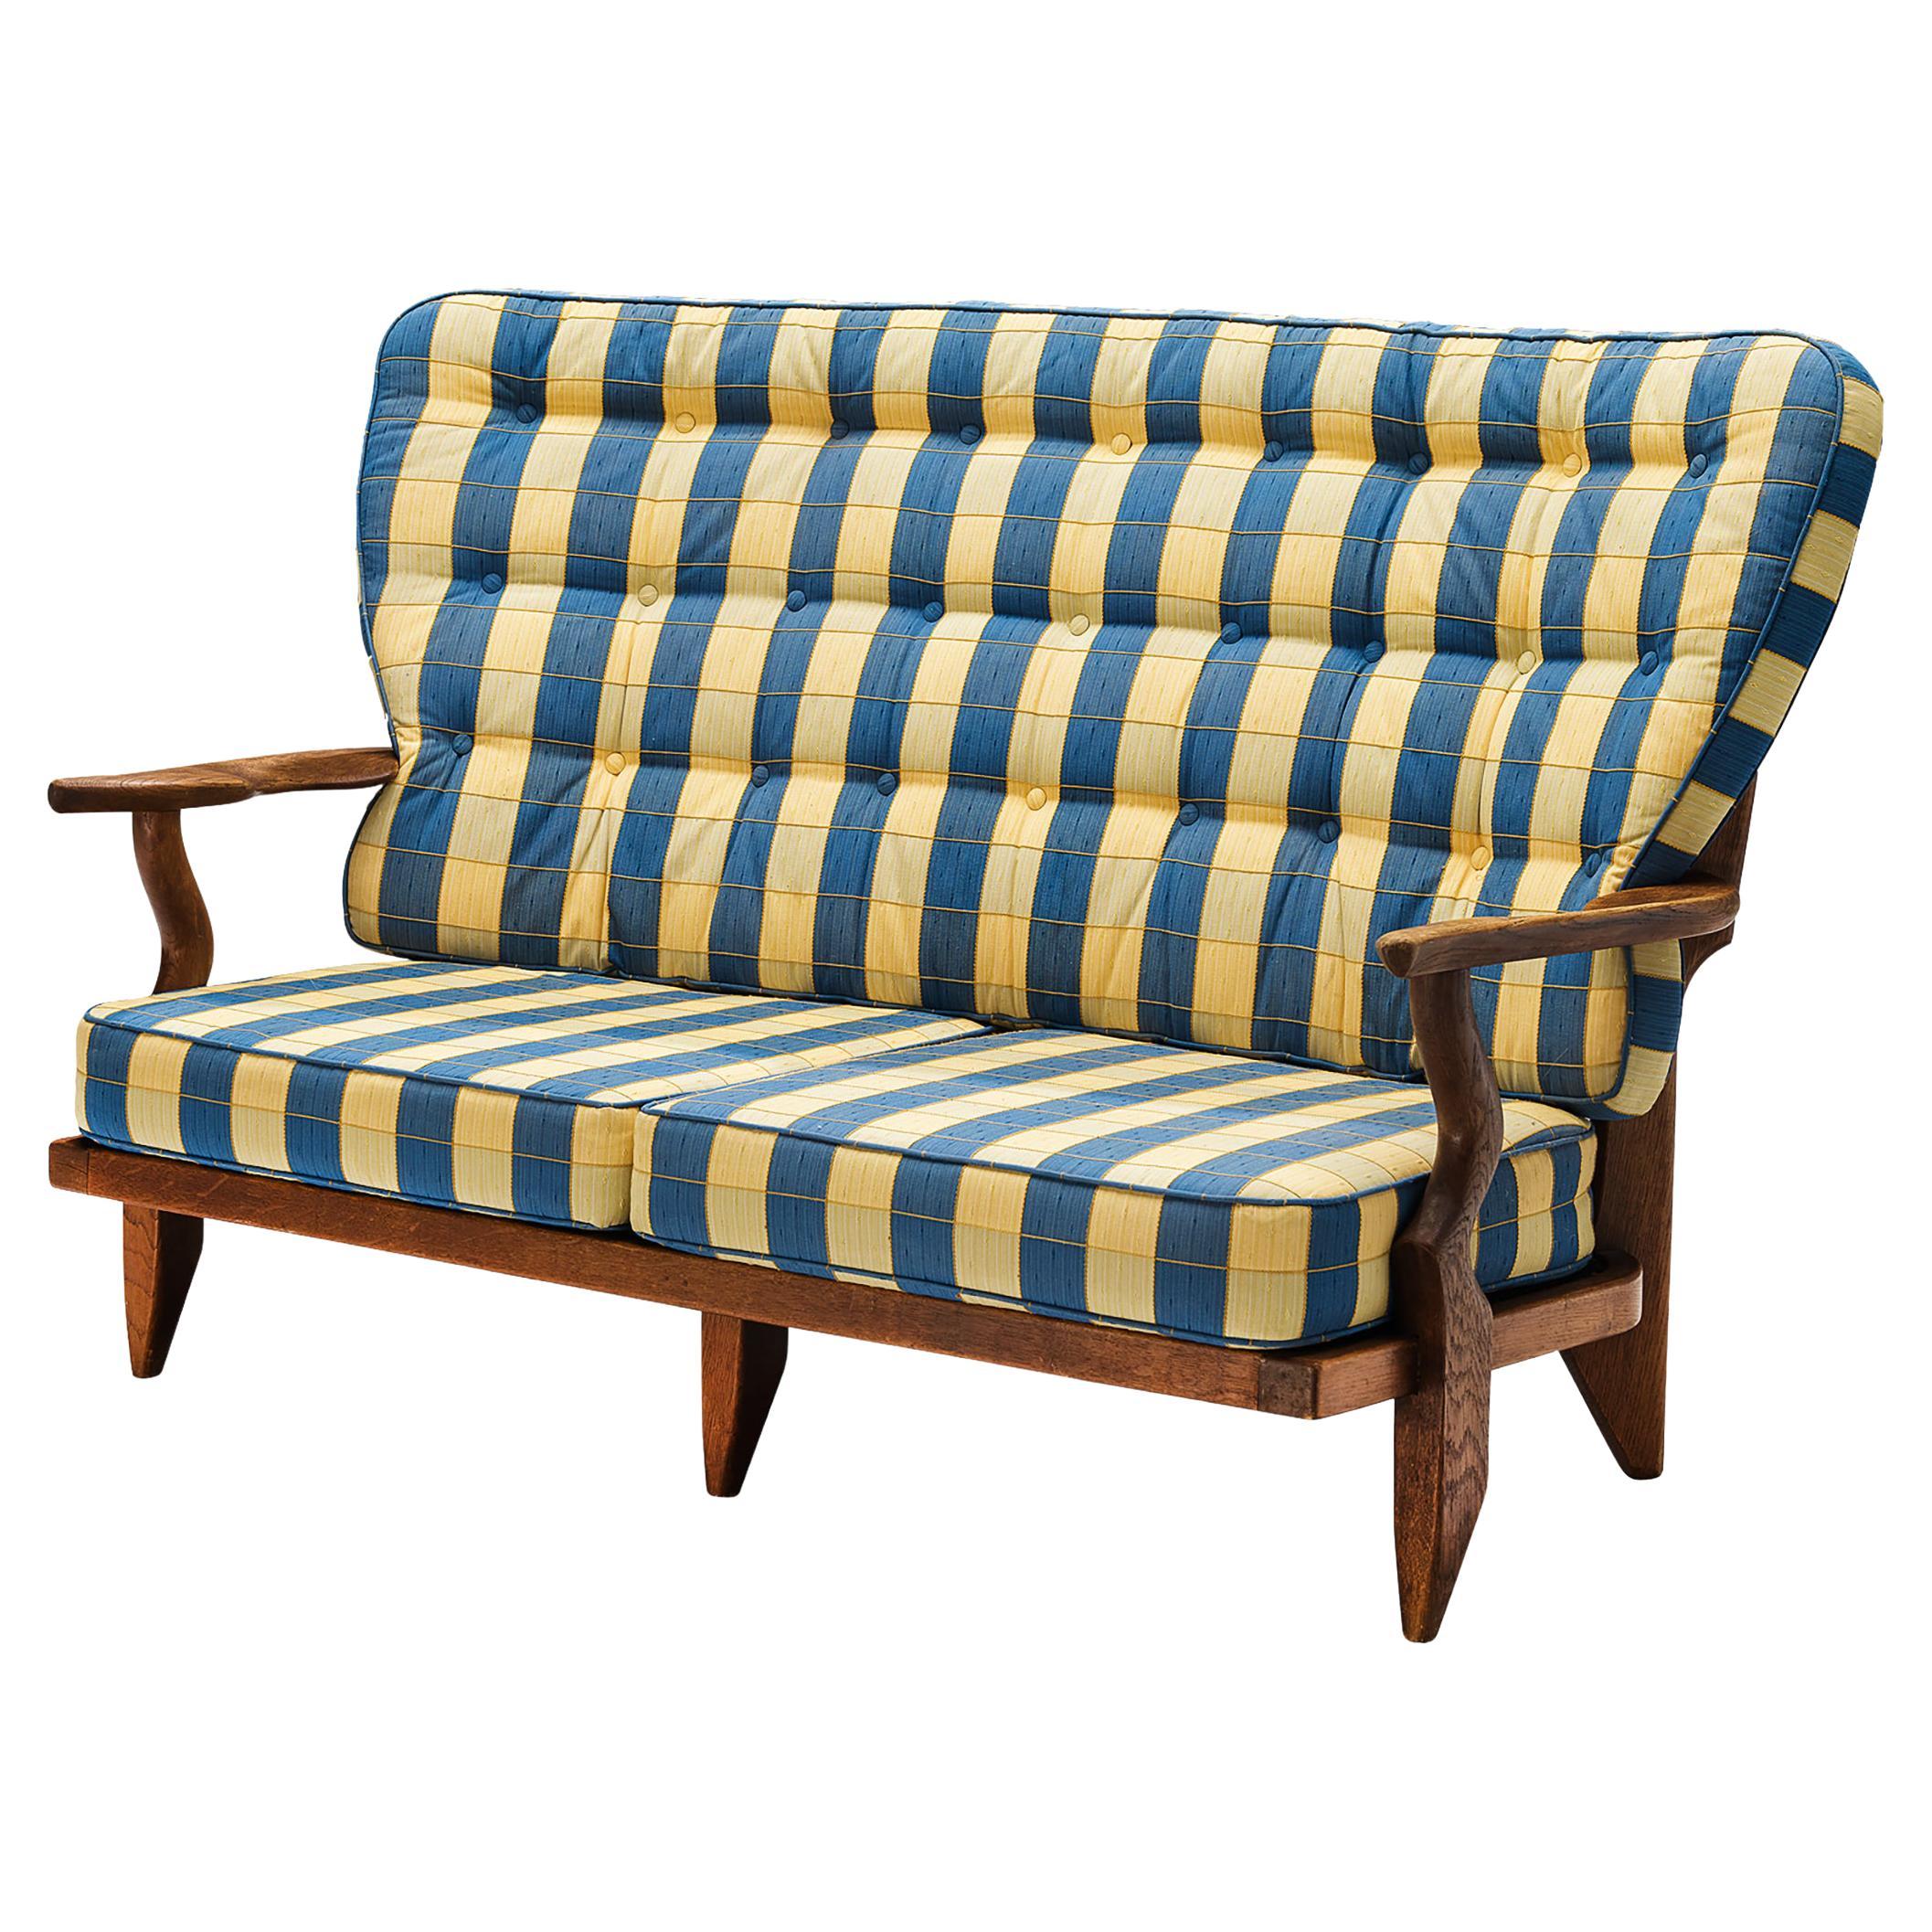 Guillerme & Chambron ´Juliette´ Sofa in Oak and Striped Upholstery